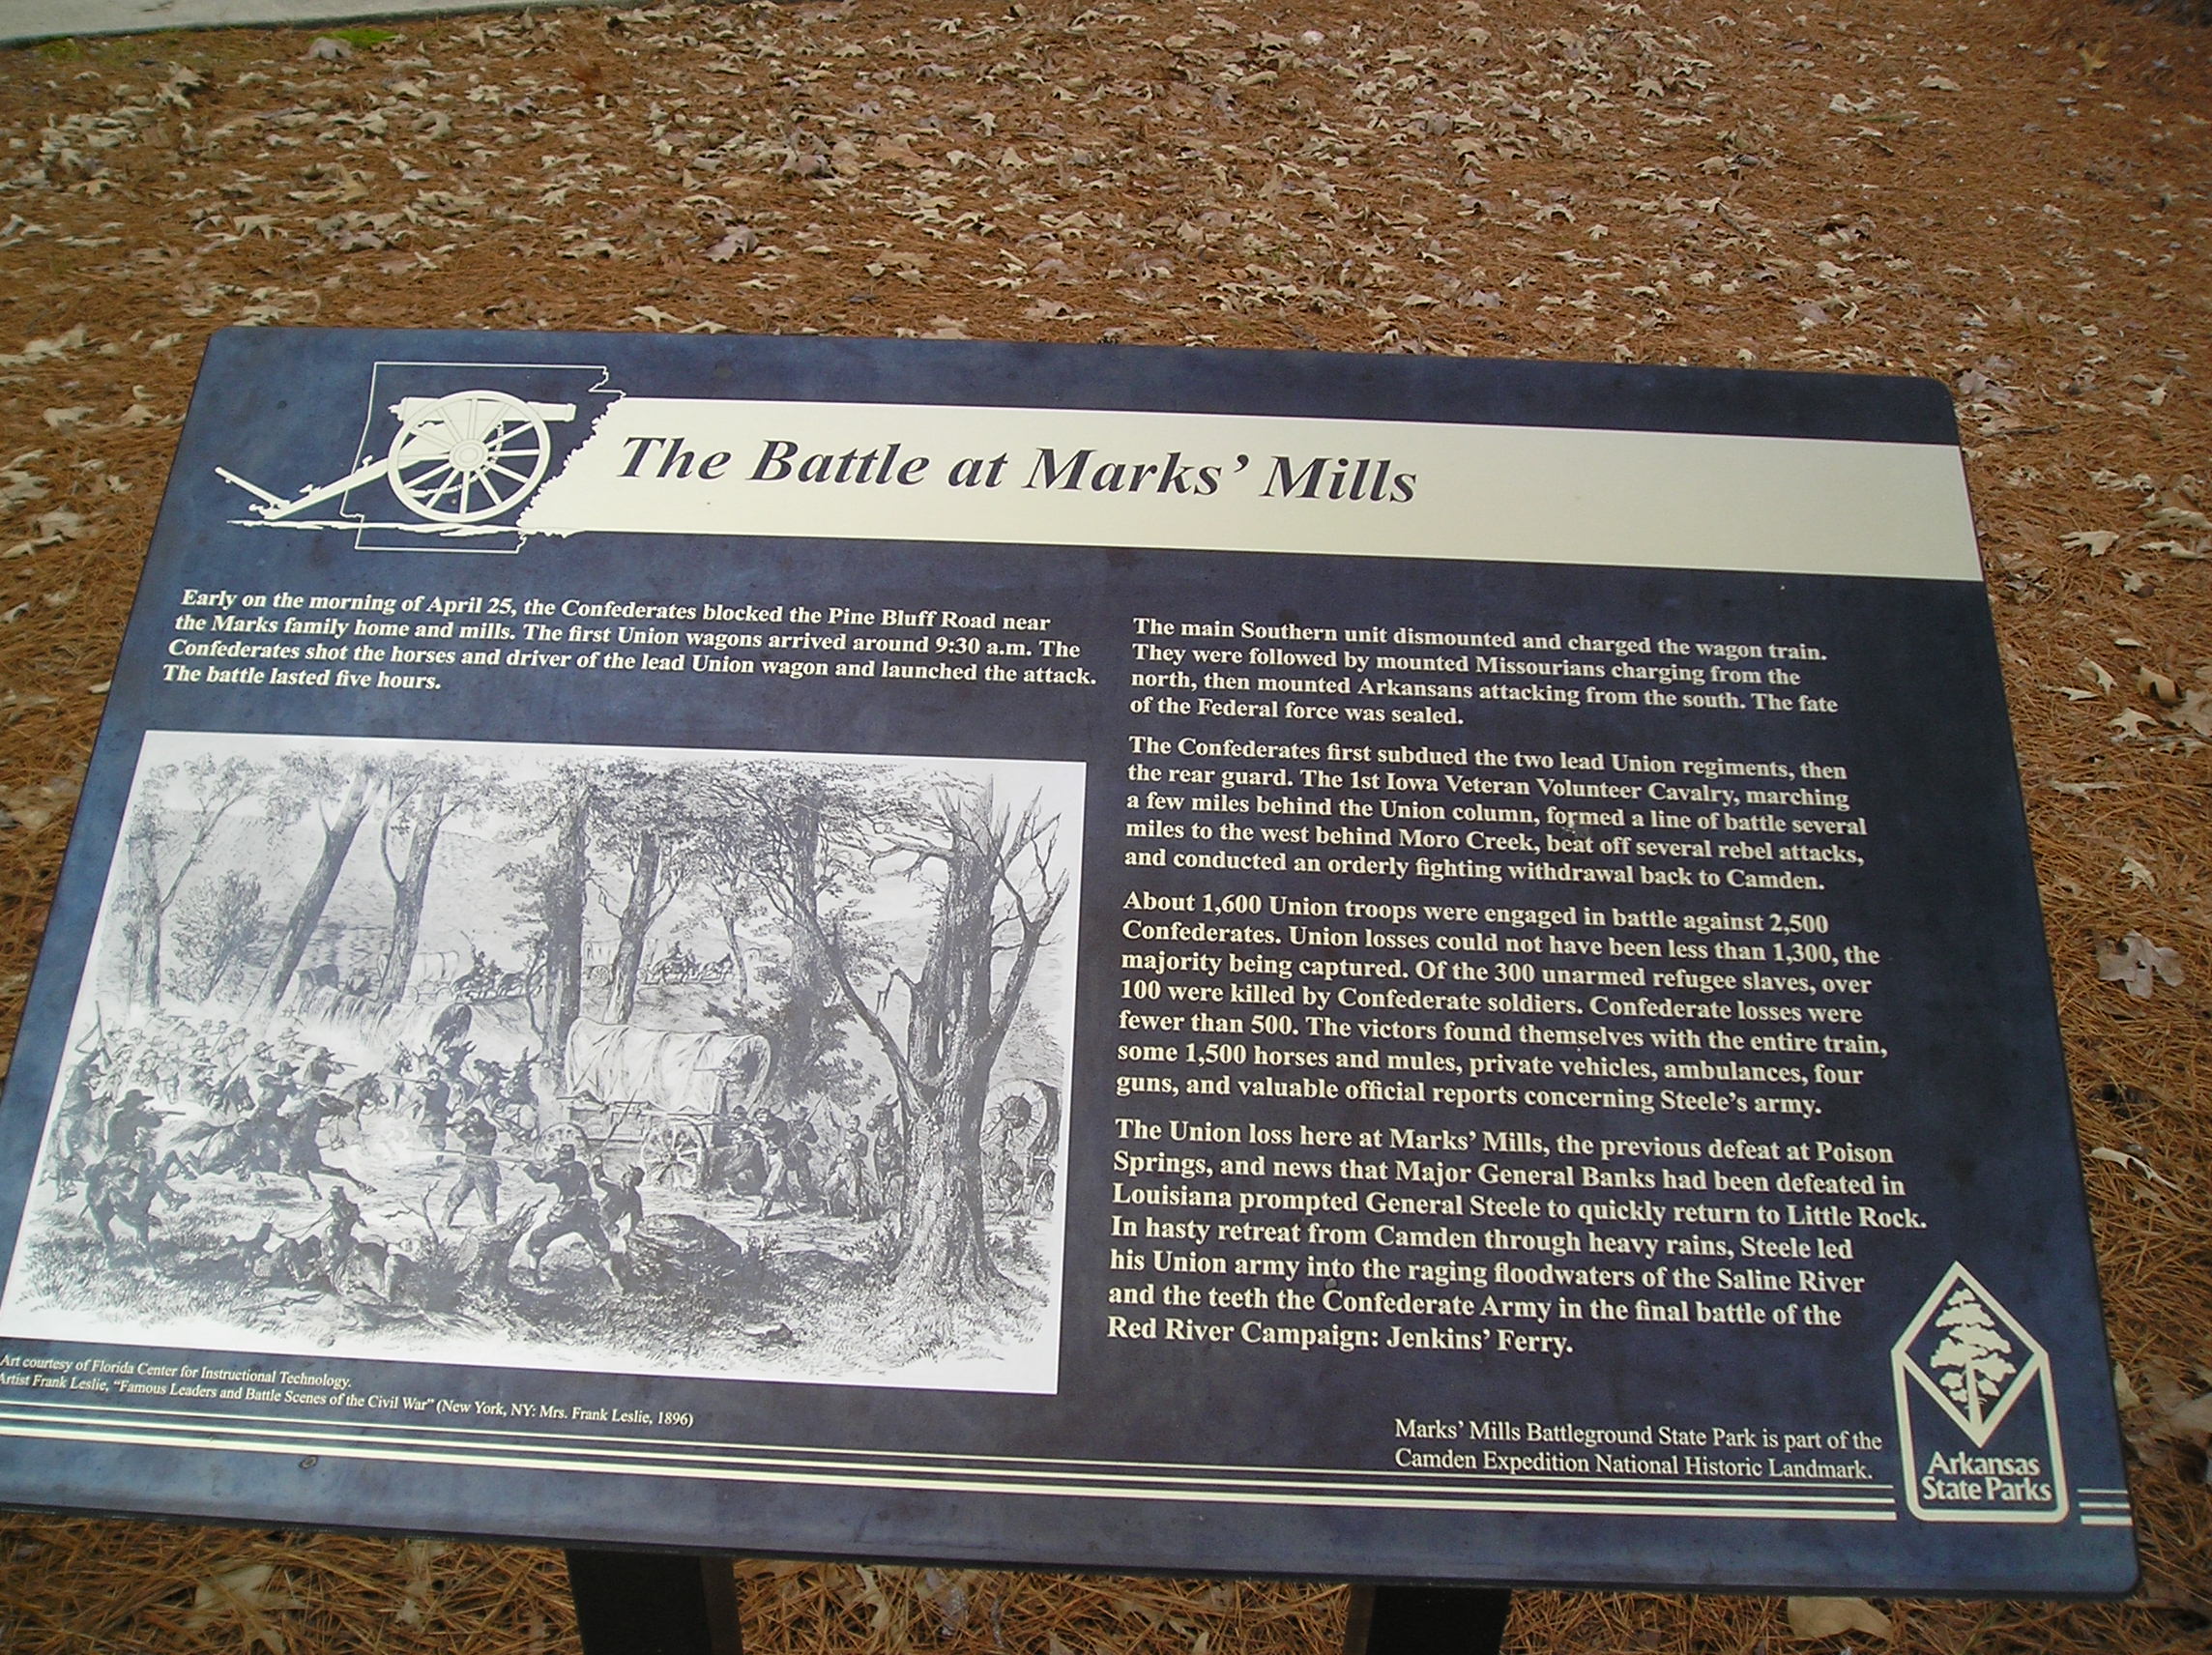 The Battle at Marks' Mills